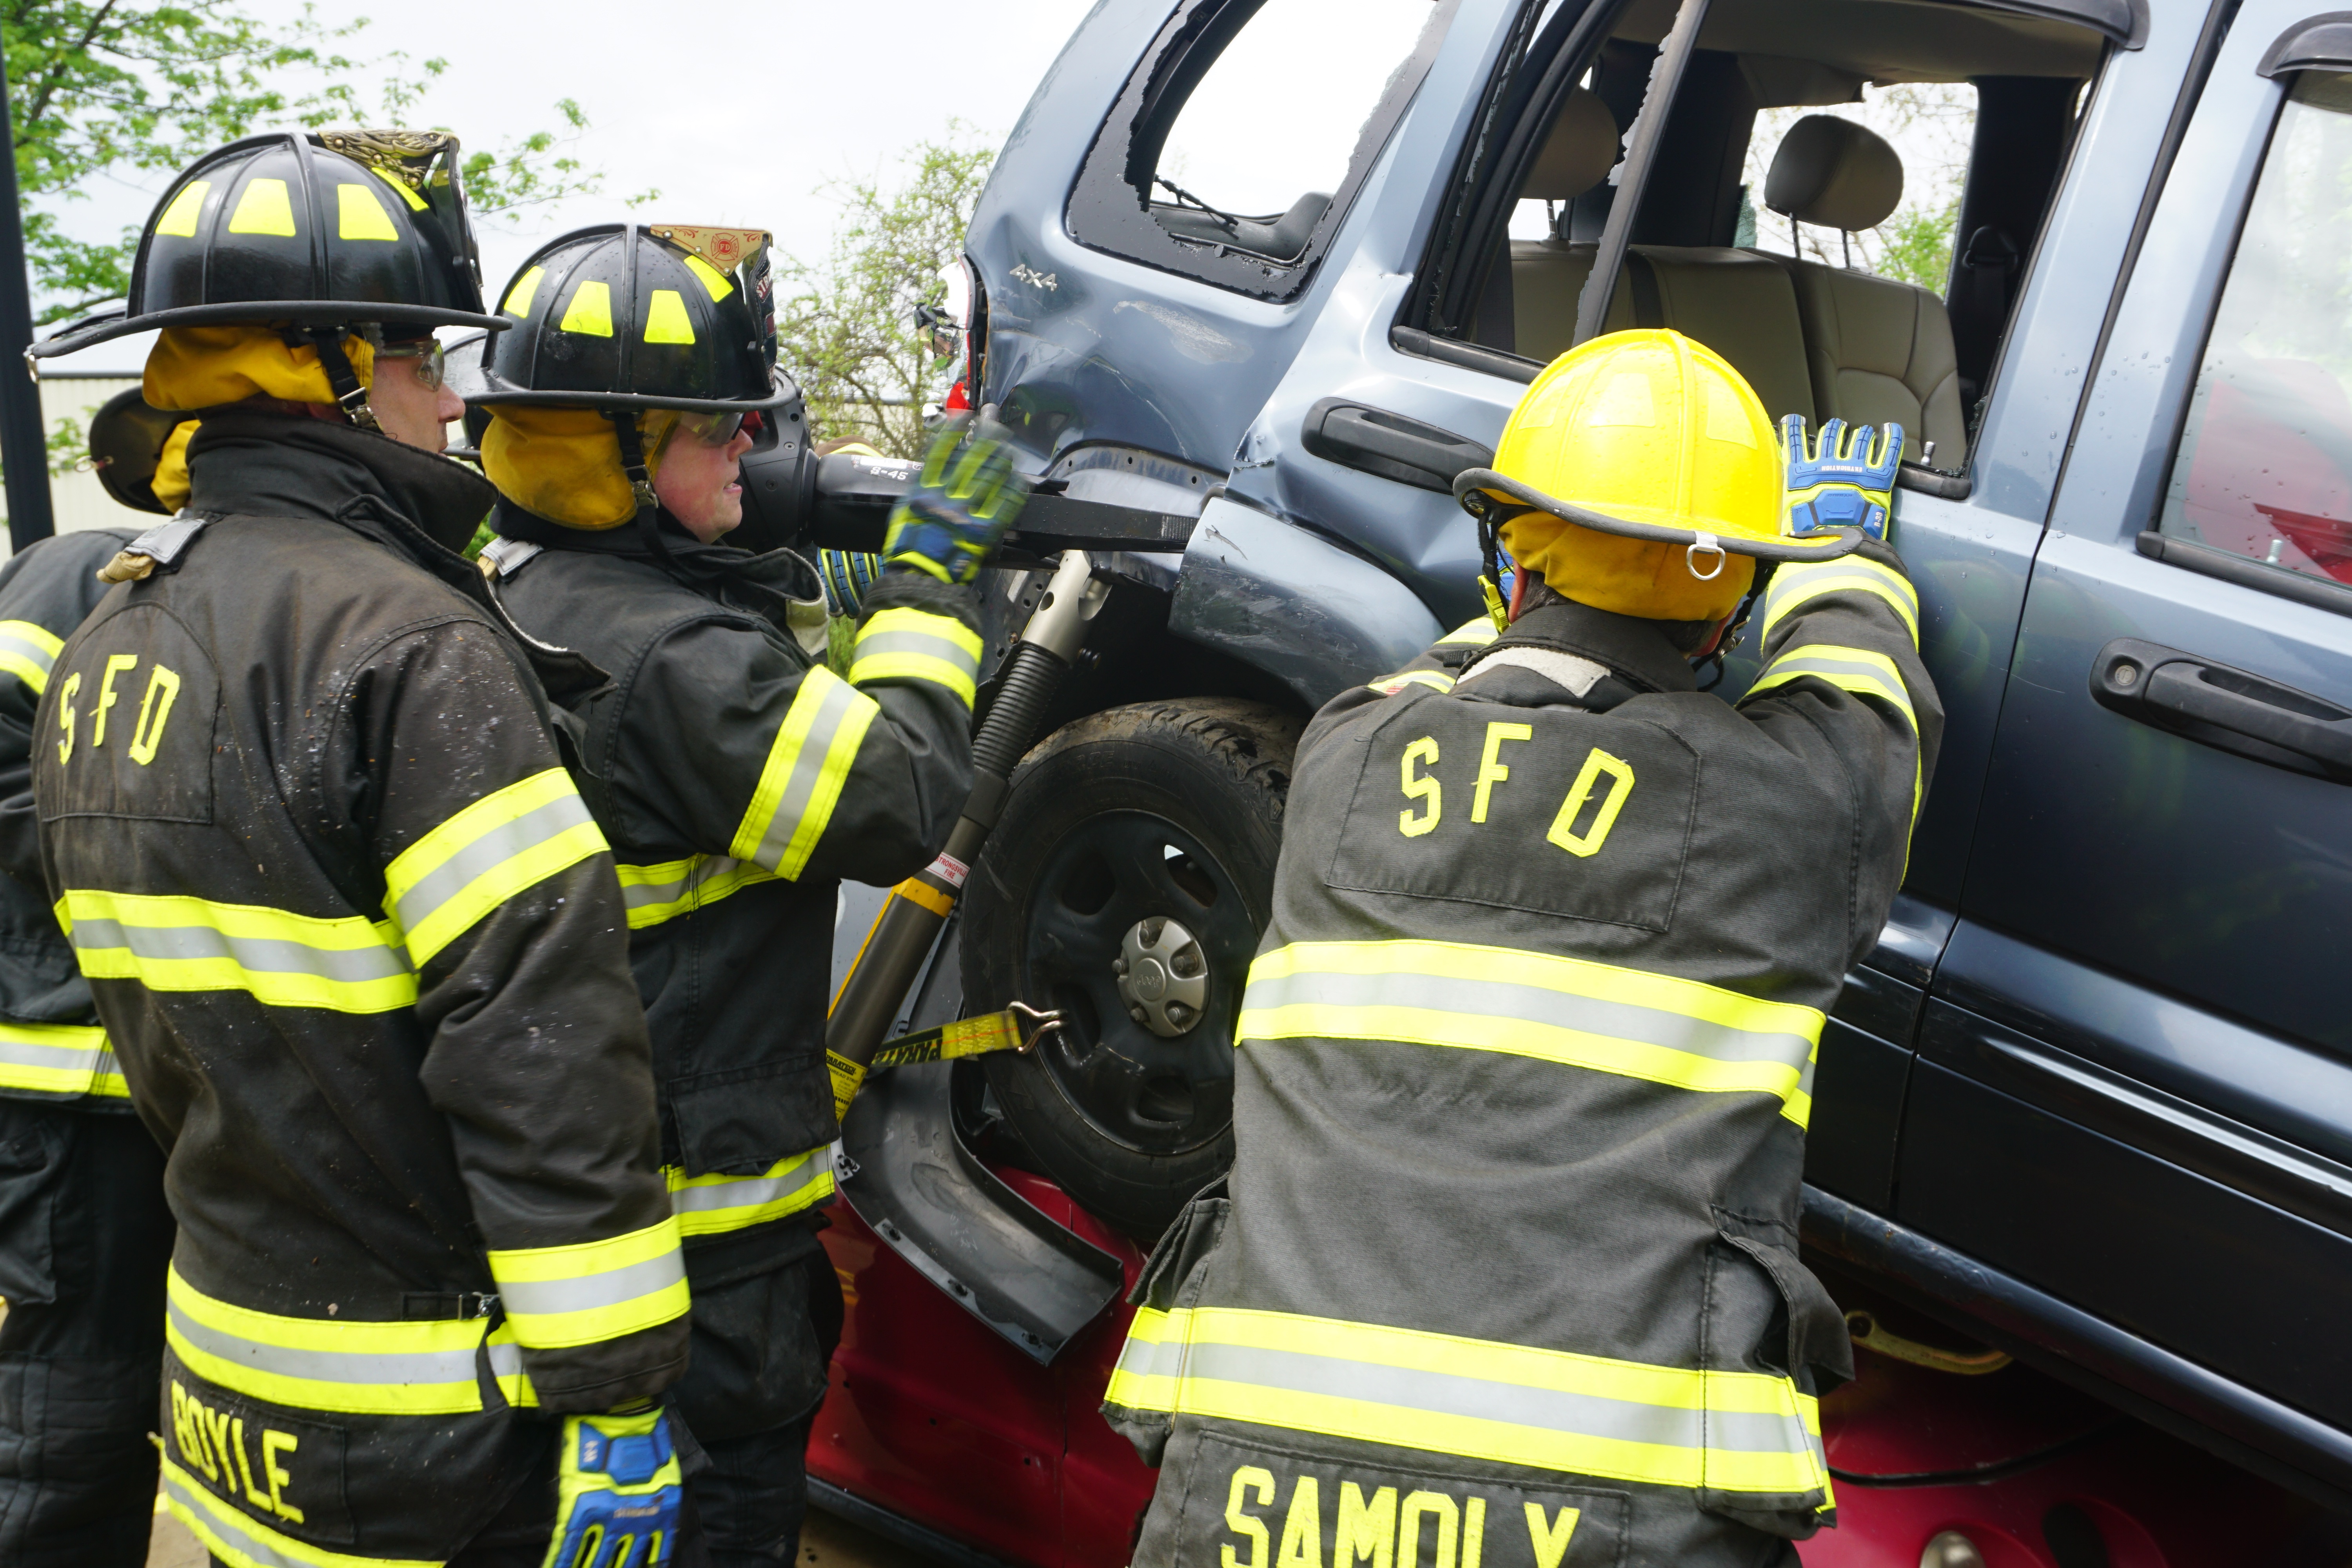 Firefighters Train on Extrication Equipment